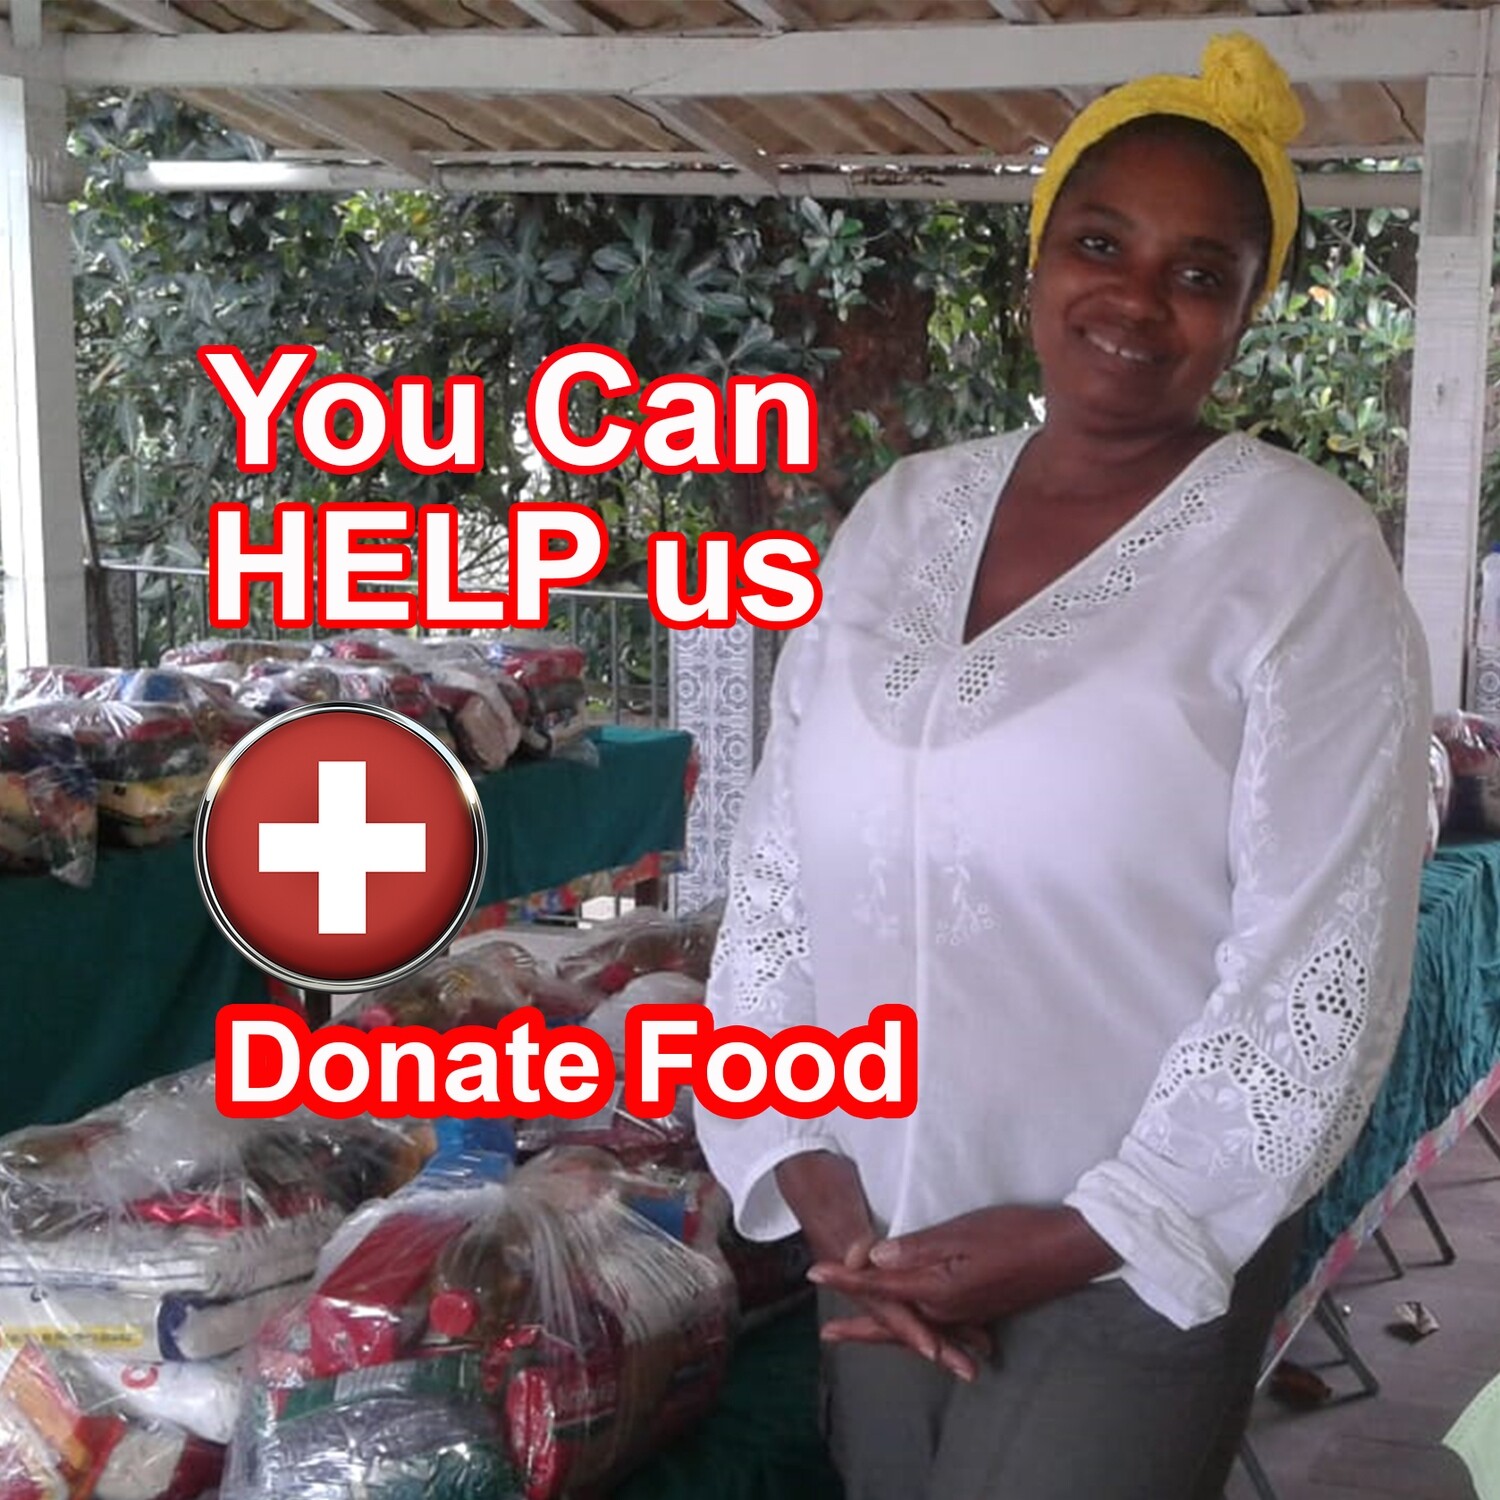 DONATE FOOD - YOU CAN HELP US